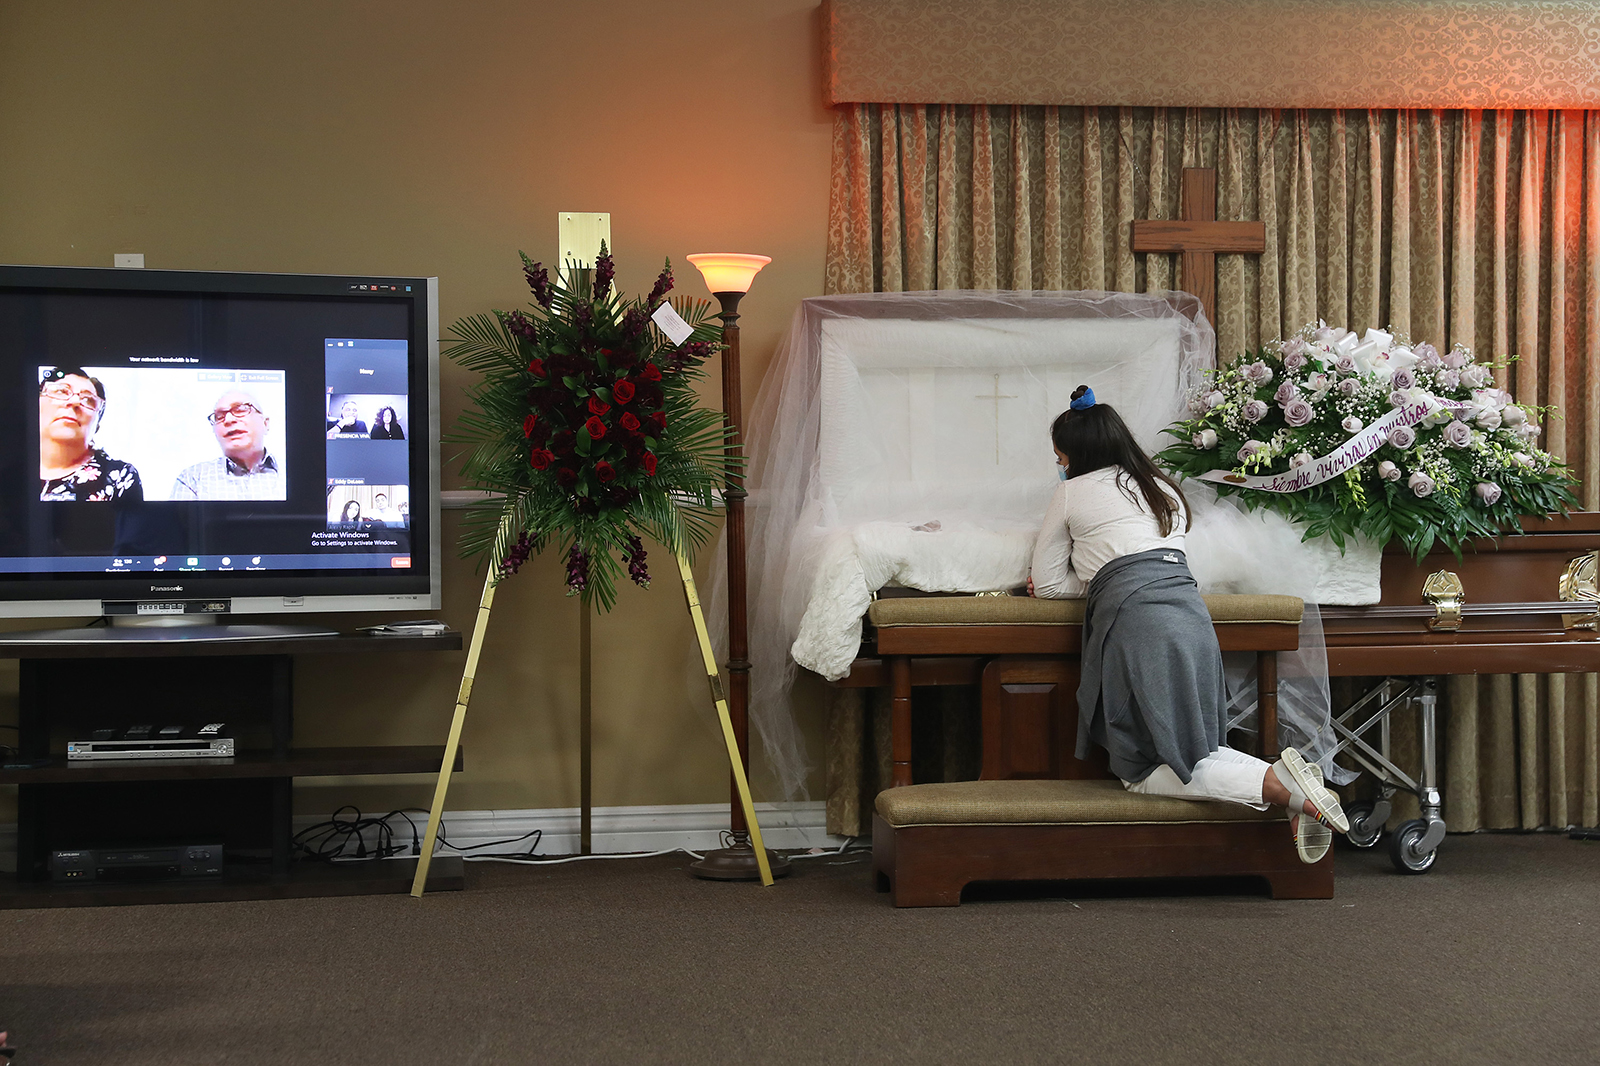 Asare Amaya,10 mourns for her father, German Amaya as family and friends are seen via a Zoom broadcast as they mourn together during the wake ceremony at the Maspons Funeral Home on August 8 in Miami, Florida.